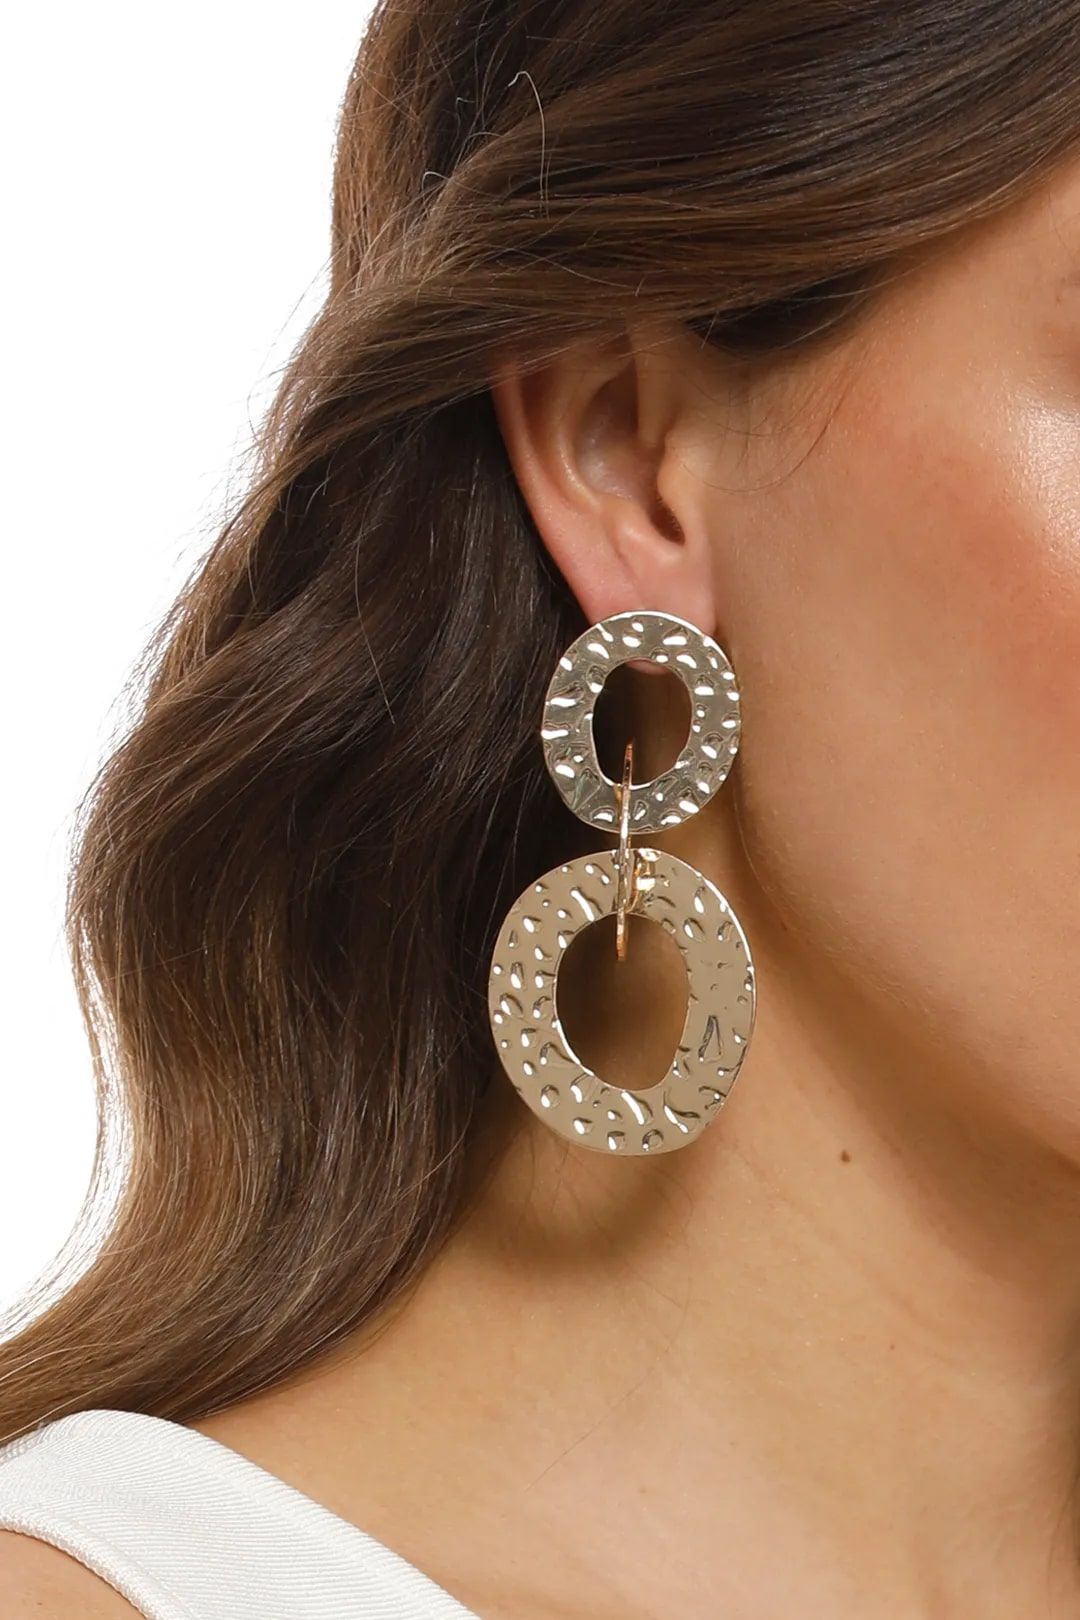 Beaten Rings Link Earrings by Adorne, available for purchase